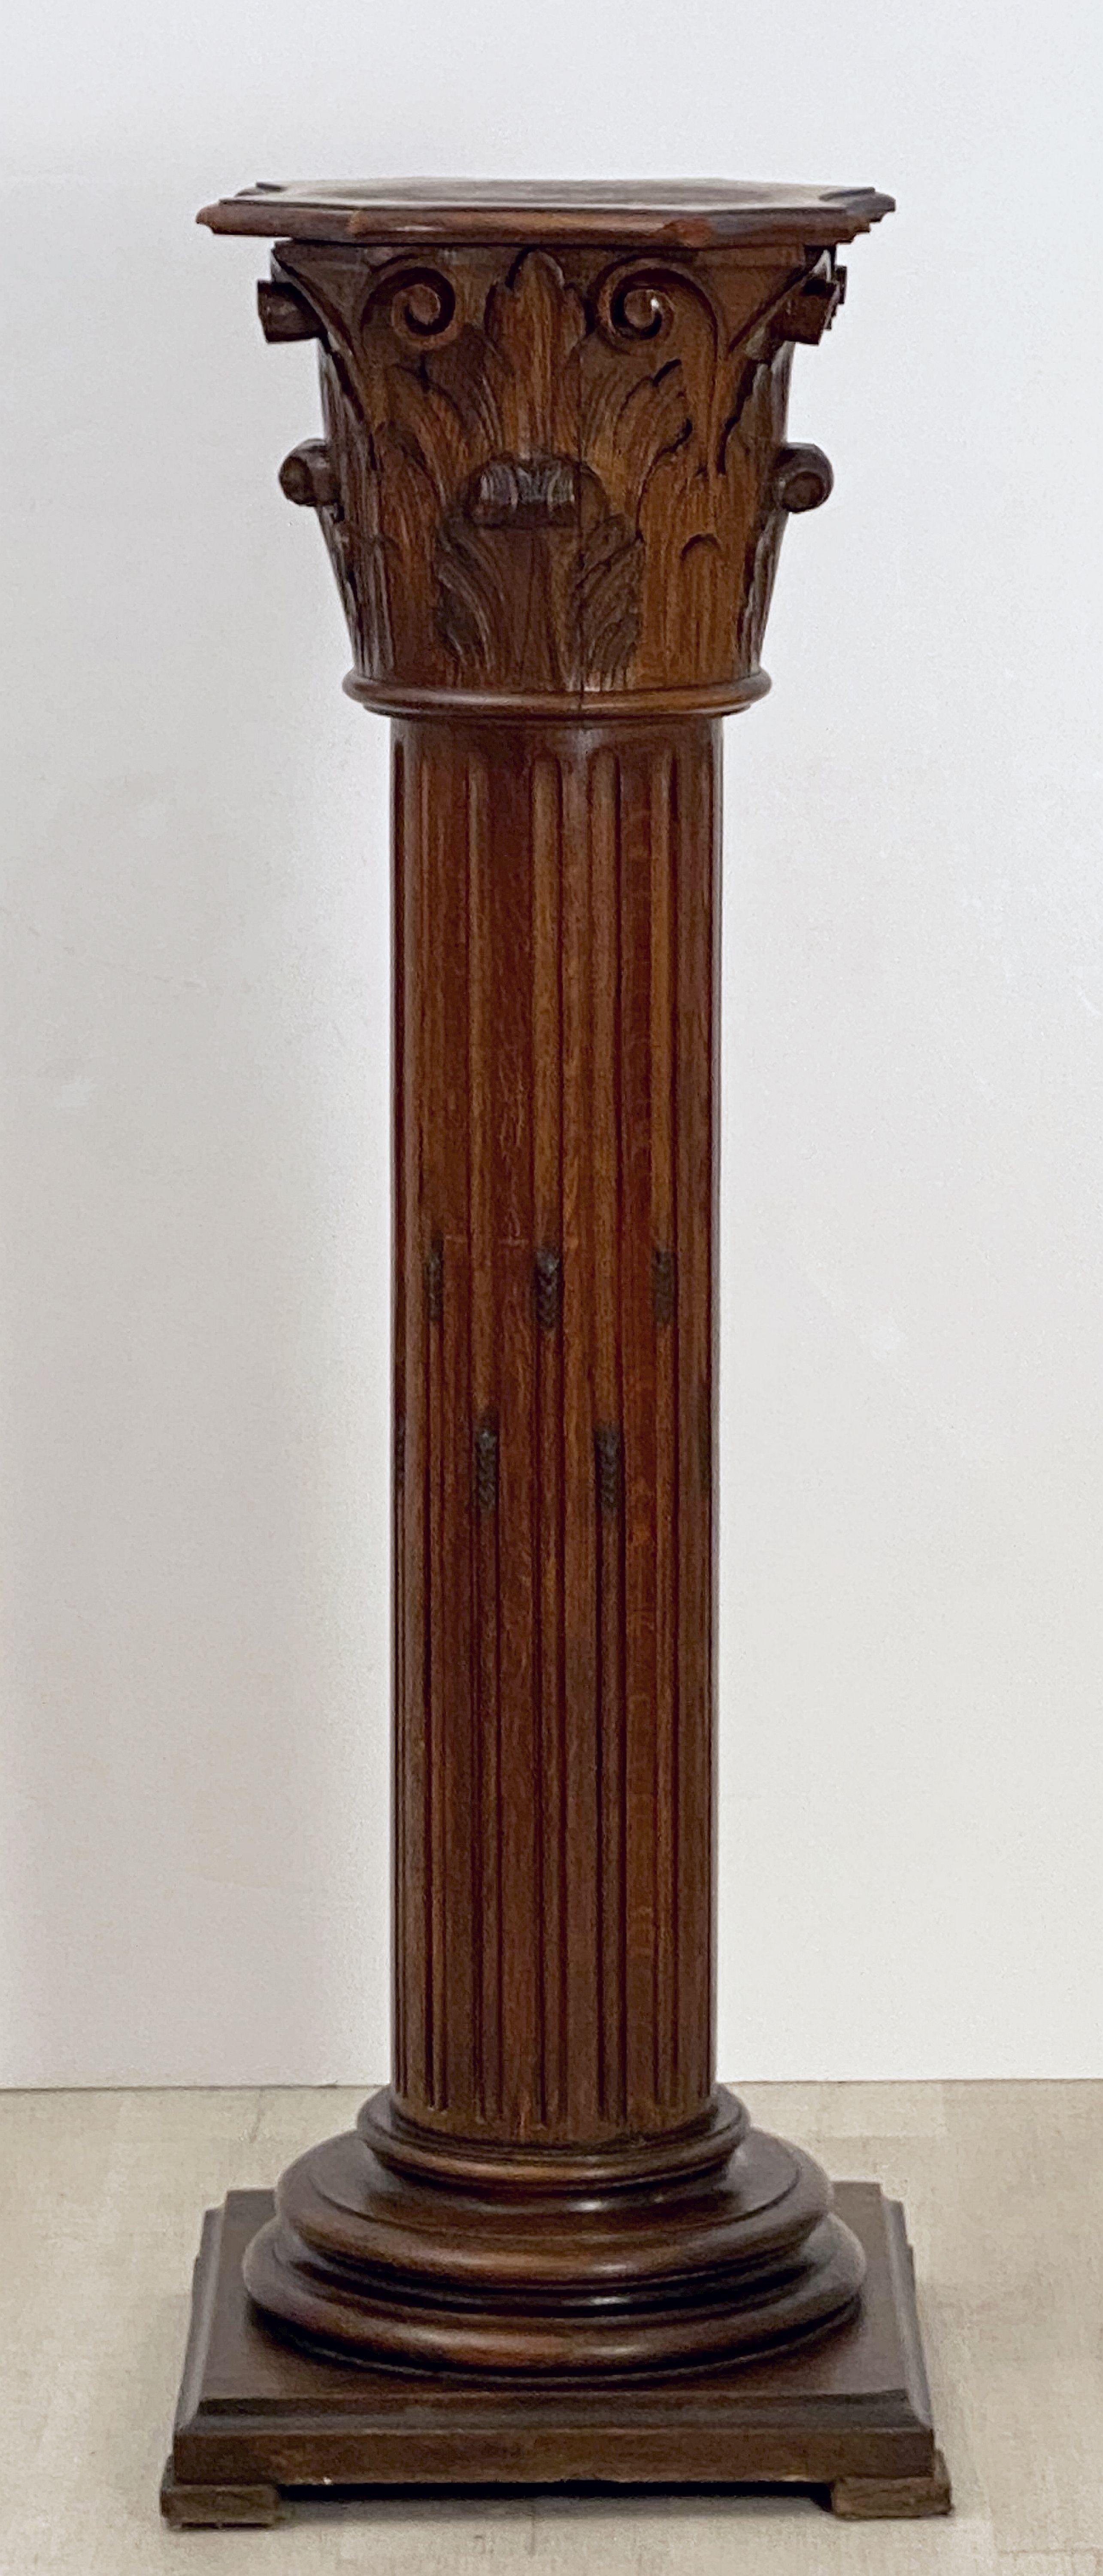 A tall finely patinated French column pedestal stand or plinth in the neoclassical style of carved wood.